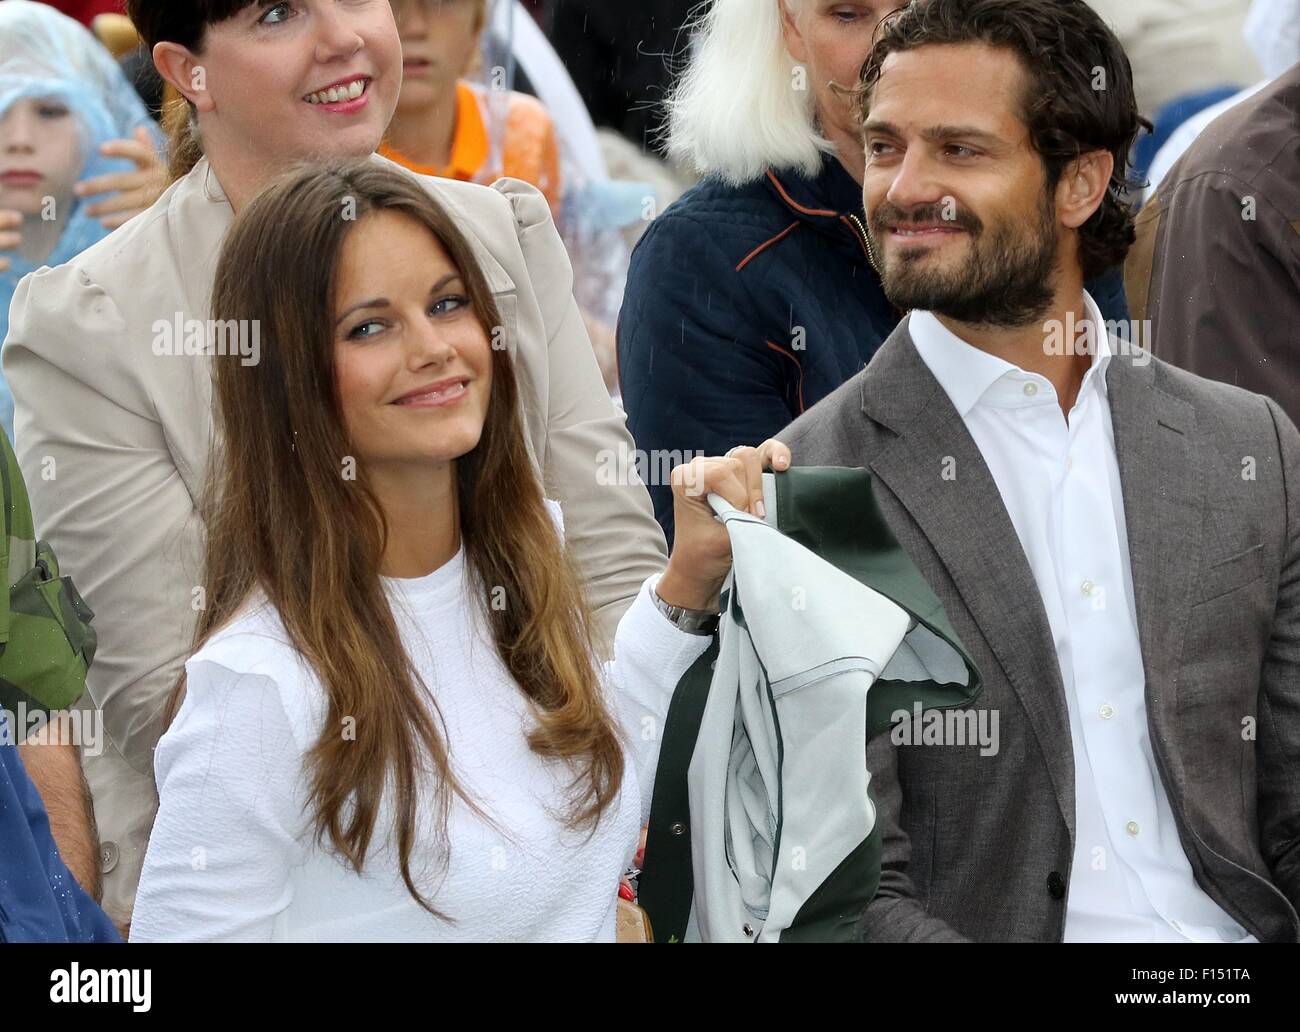 Värmland- 26-08-2015 Prince Carl Philip and Princess Sofia Princess Sofia and Prince Carl Philip on the 1st day of the 2 day visit to Varmland Visit at the Byamossarna naturreservatet RPE/Albert Nieboer/Netherlands OUT - NO WIRE SERVICE - Stock Photo